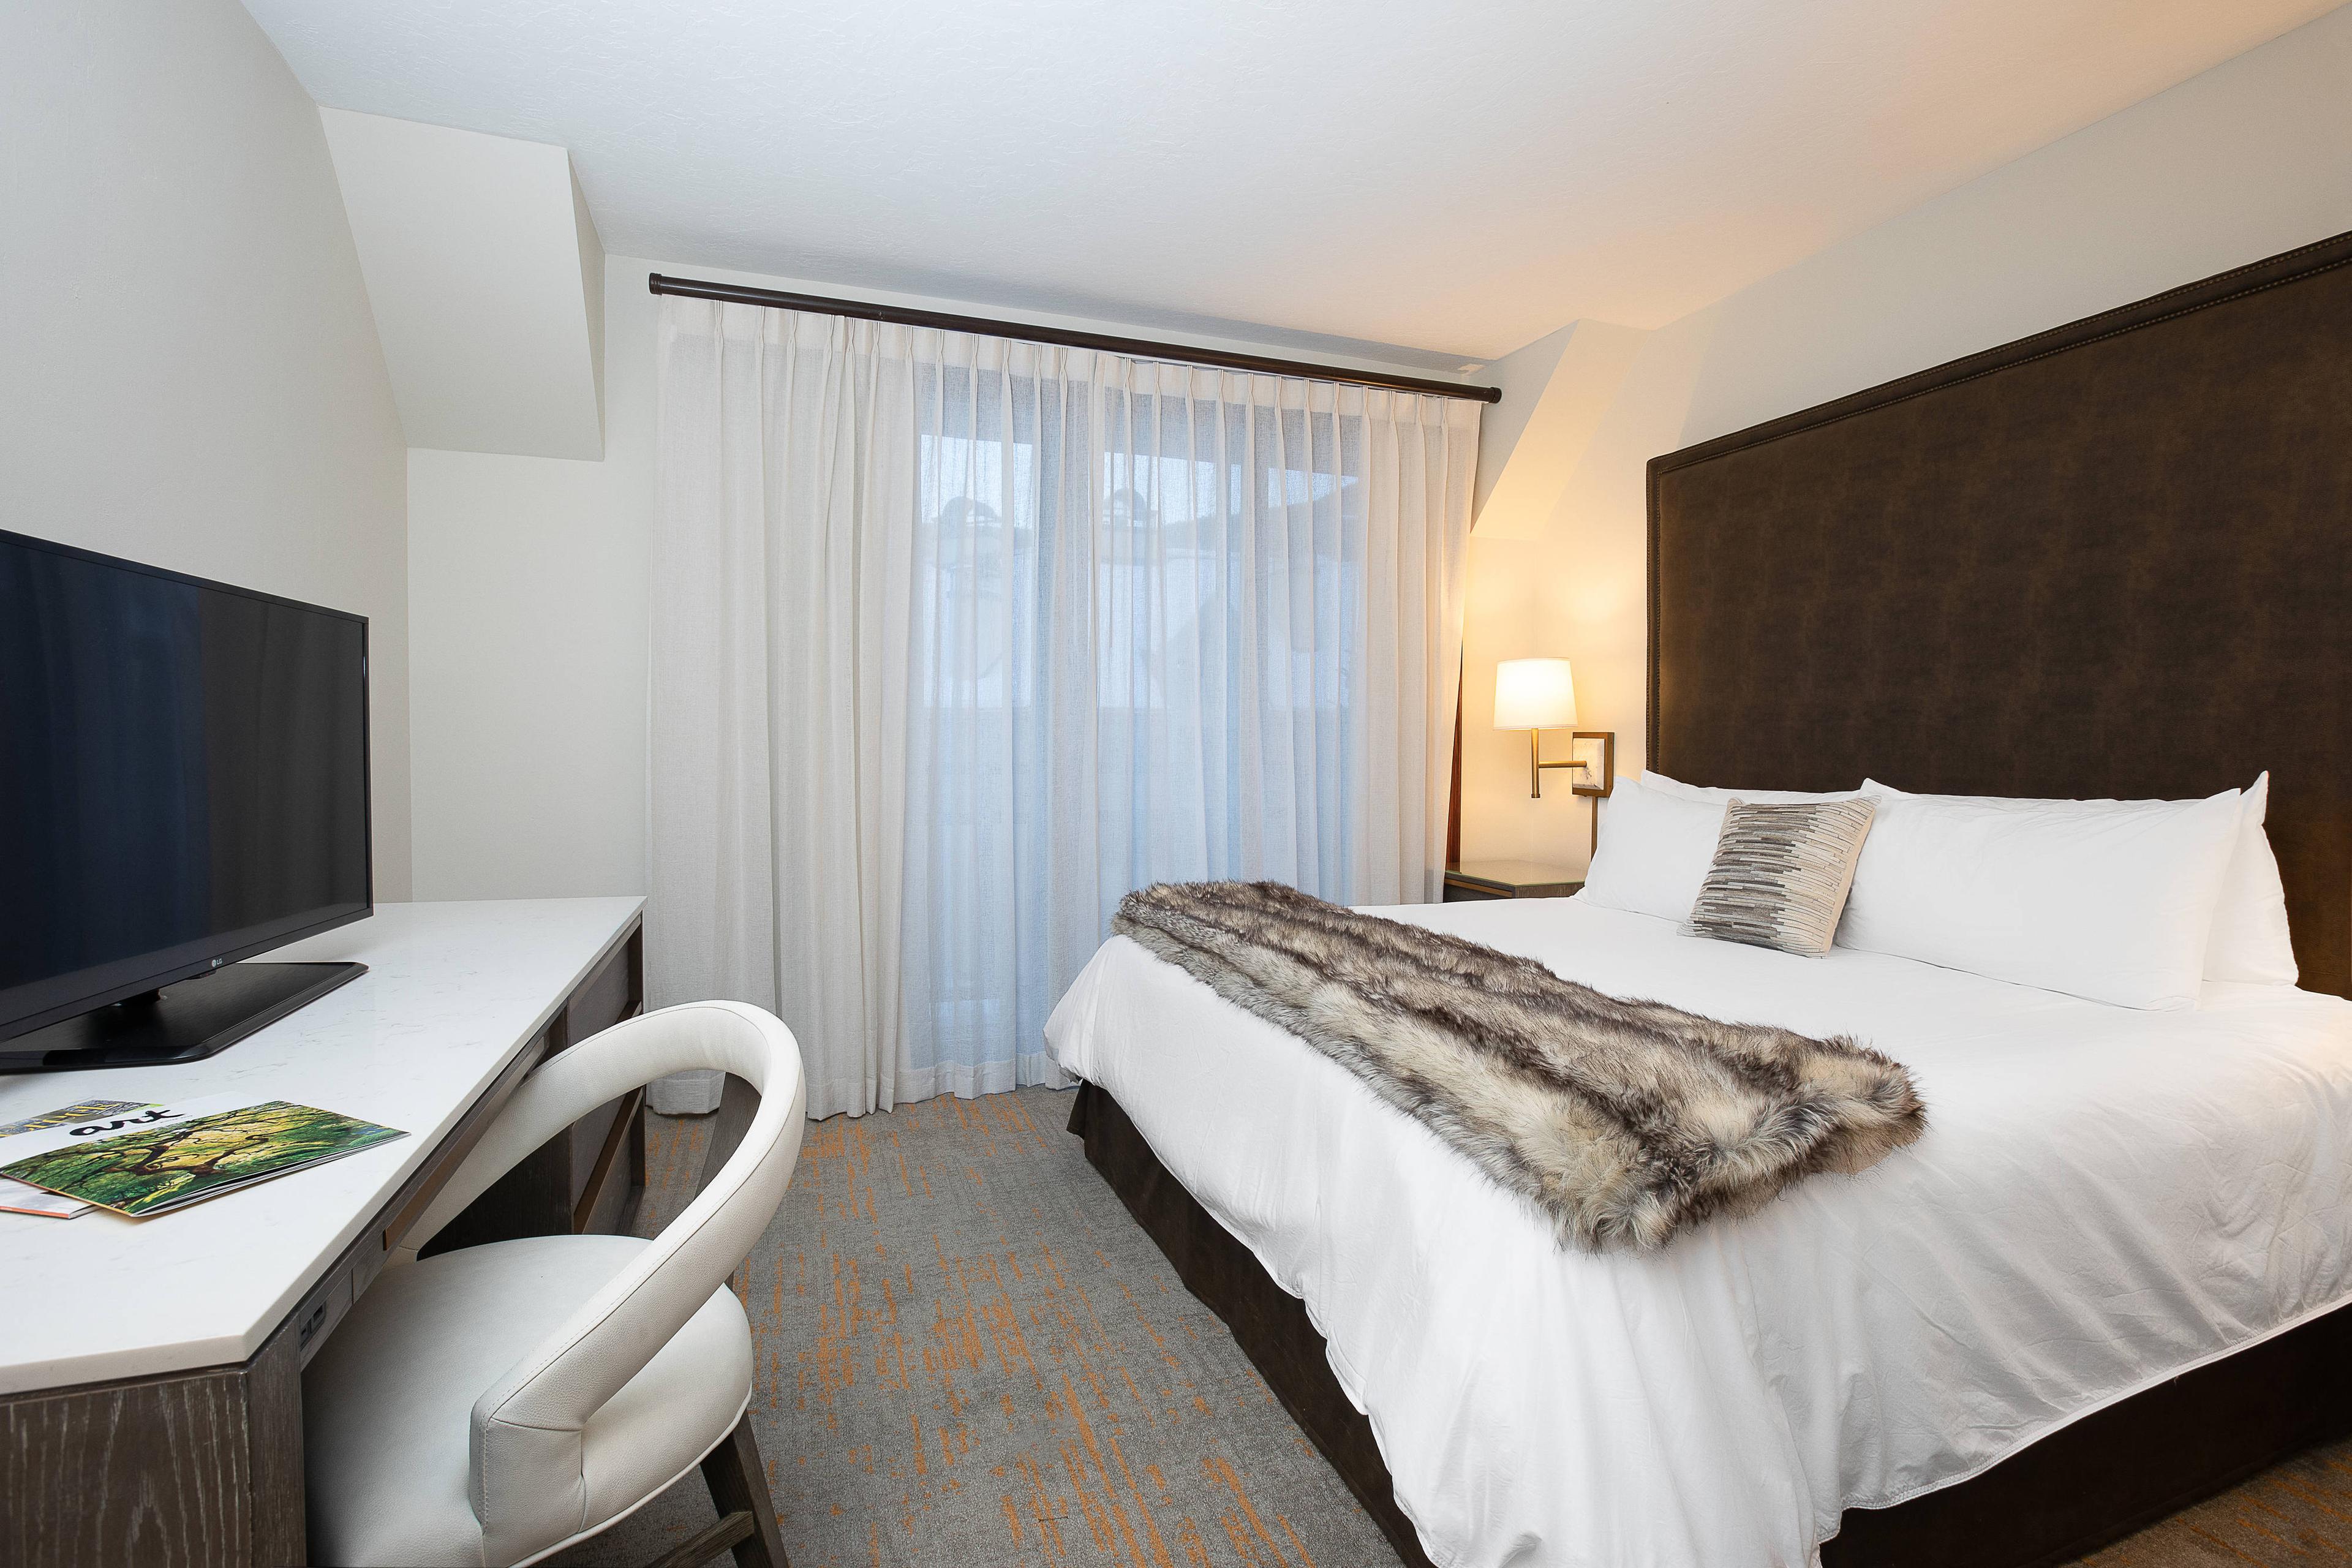 This cozy suite with one king-size bed boasts plush bedding, a warm fireplace, ergonomic workstation and floor-to-ceiling windows through which you can see the gorgeous water views.